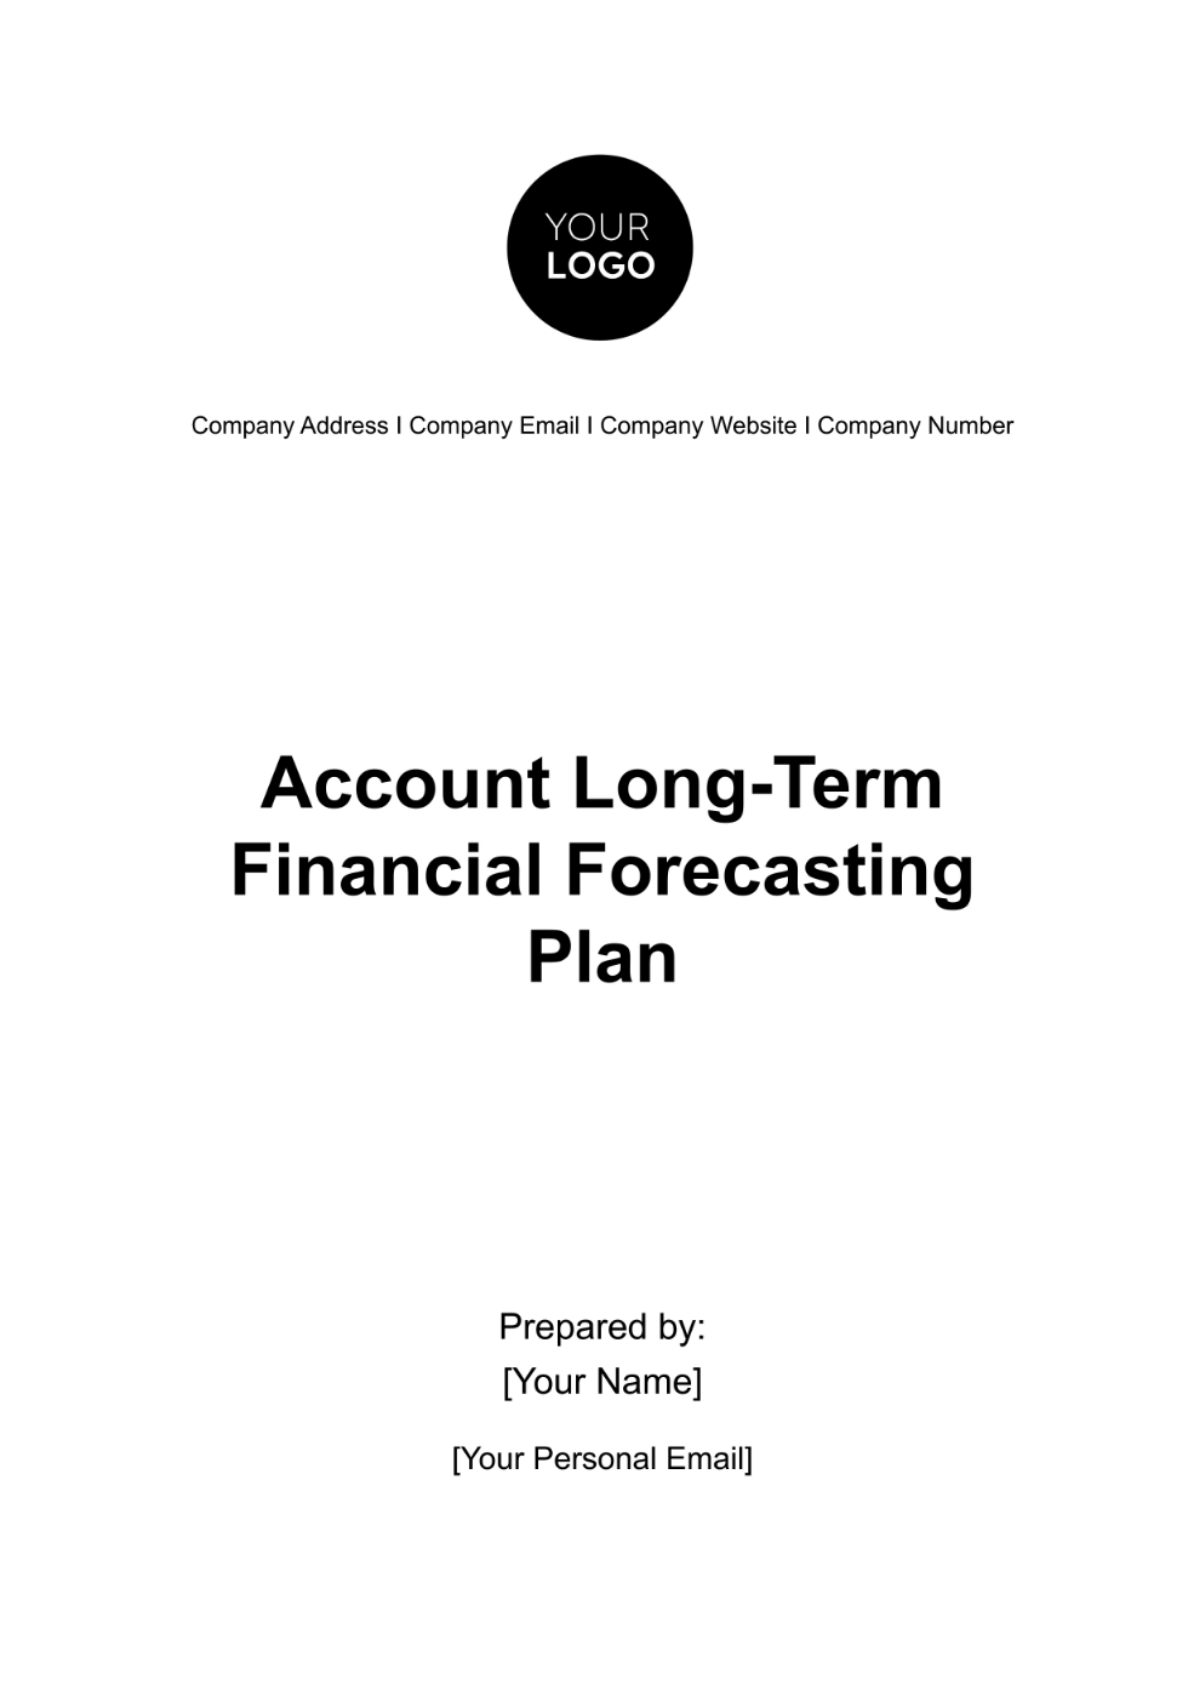 Free Account Long-Term Financial Forecasting Plan Template